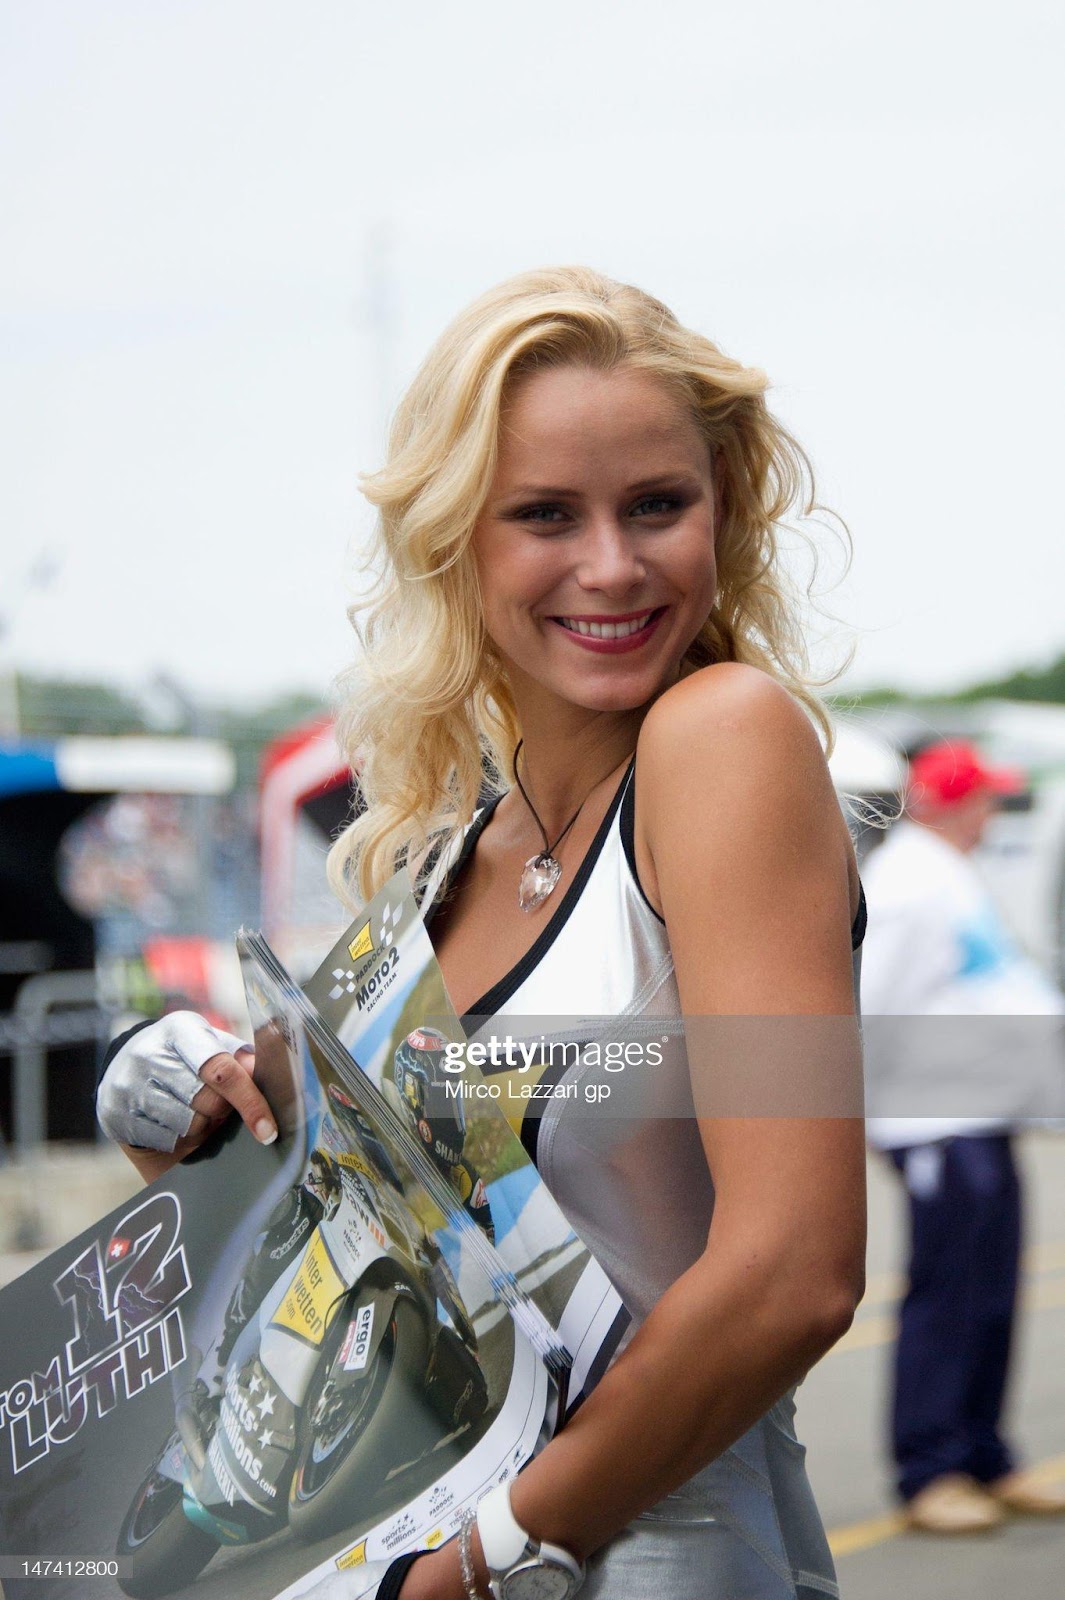 D:\Documenti\posts\posts\Women and motorsport\foto\Getty e altre\grid-girl-poses-and-smiles-on-the-pit-during-the-qualifying-practice-picture-id147412800.jpg